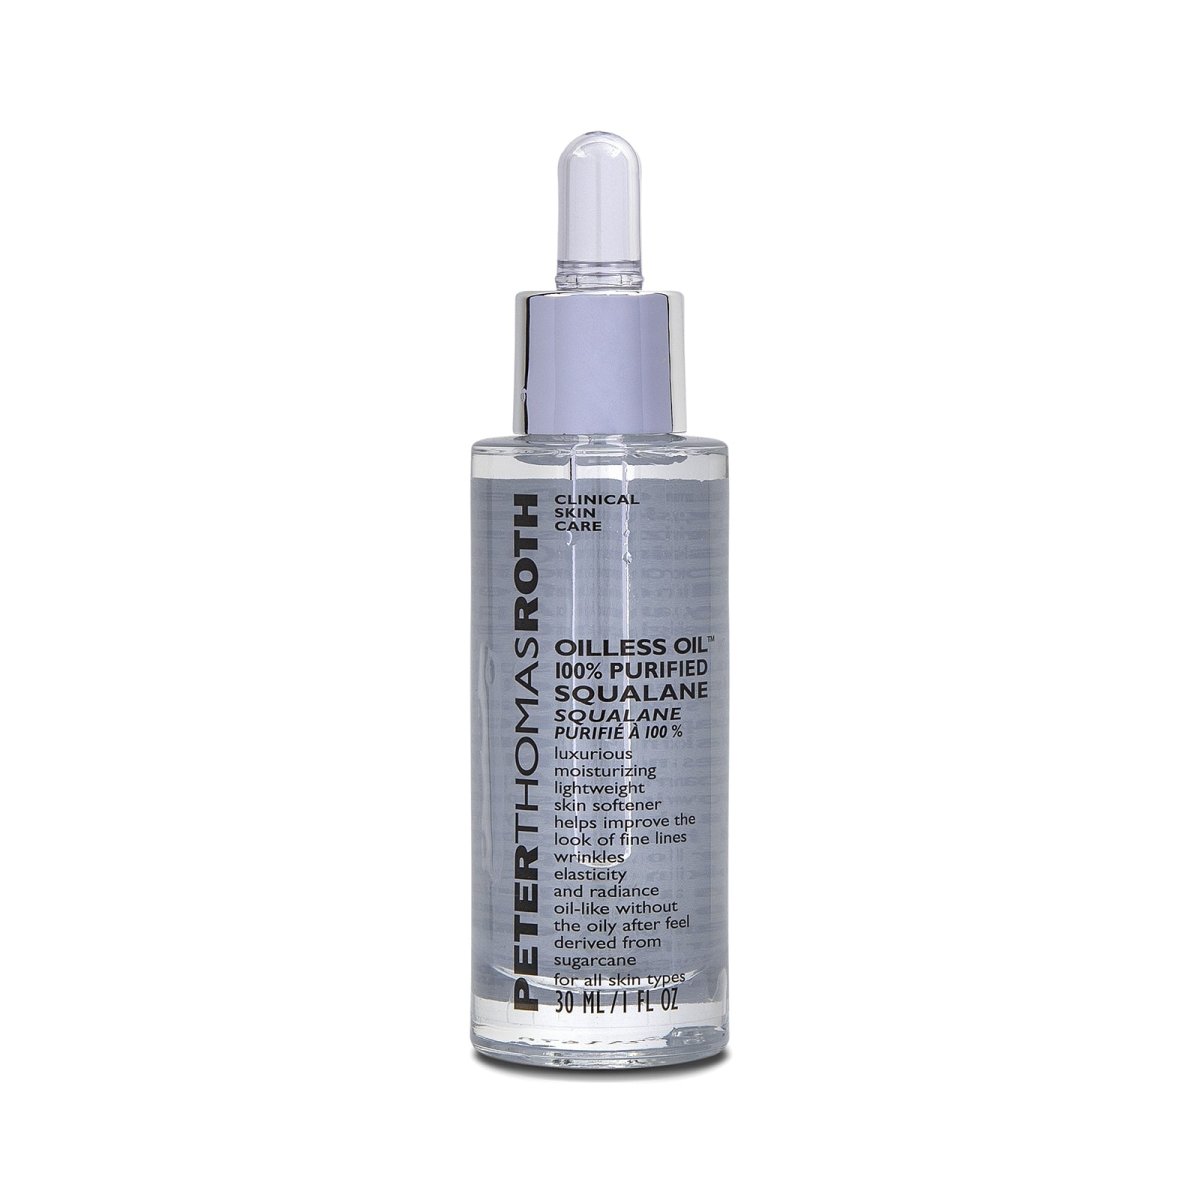 Peter Thomas Roth Oilless Oil™ 100% Purified Squalane - SkincareEssentials